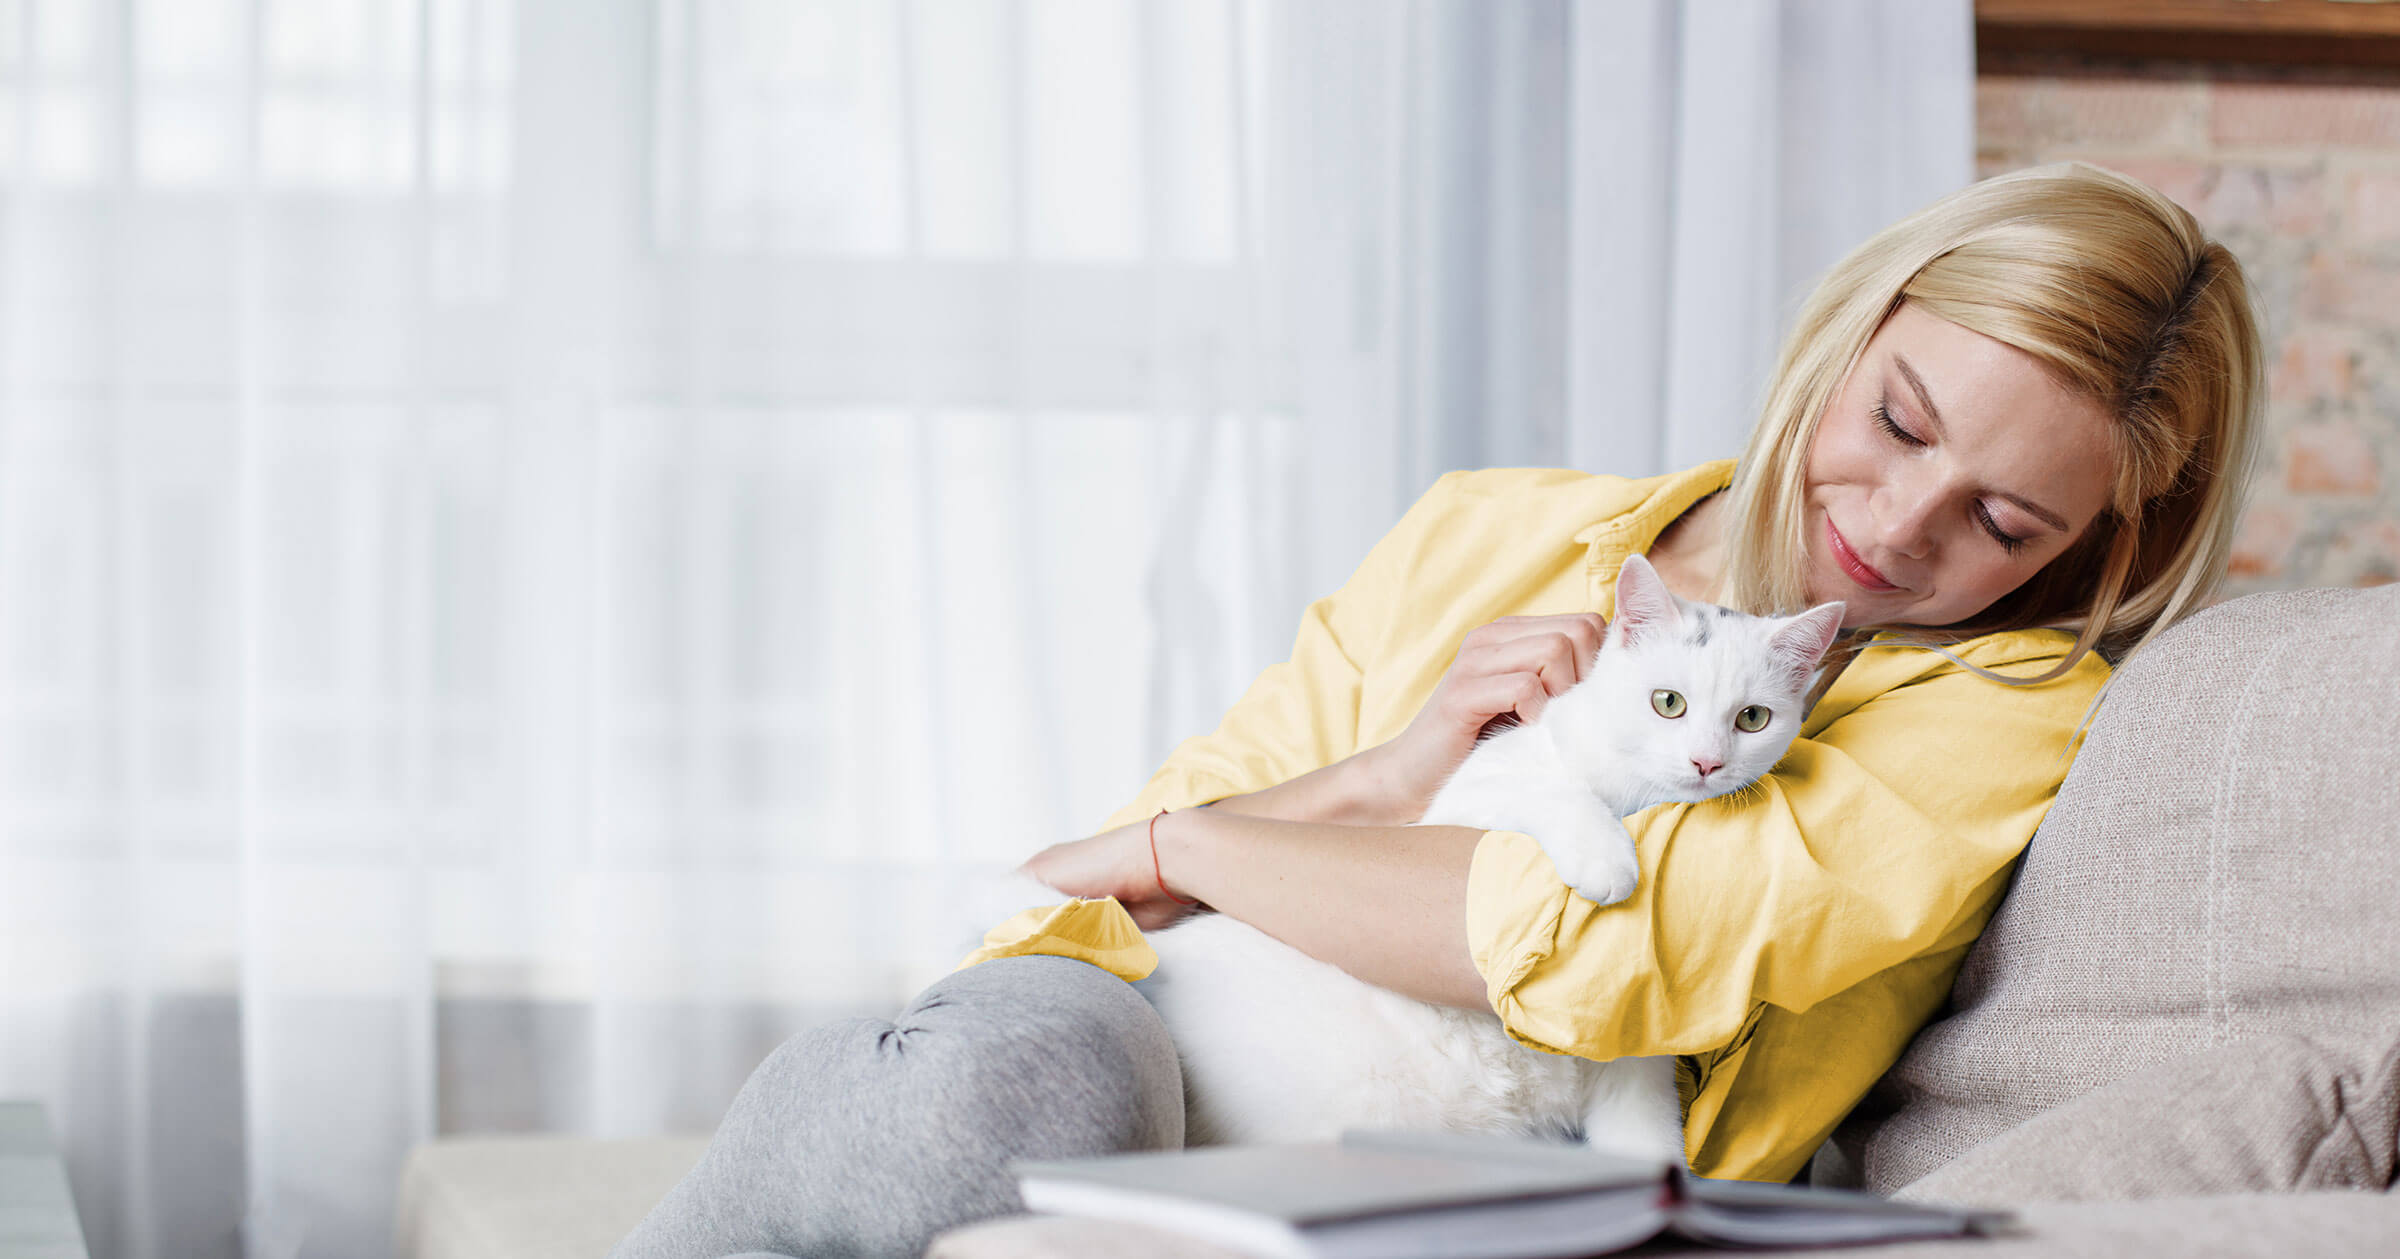 A woman wearing a yellow shirt sits on a couch holding a white cat.